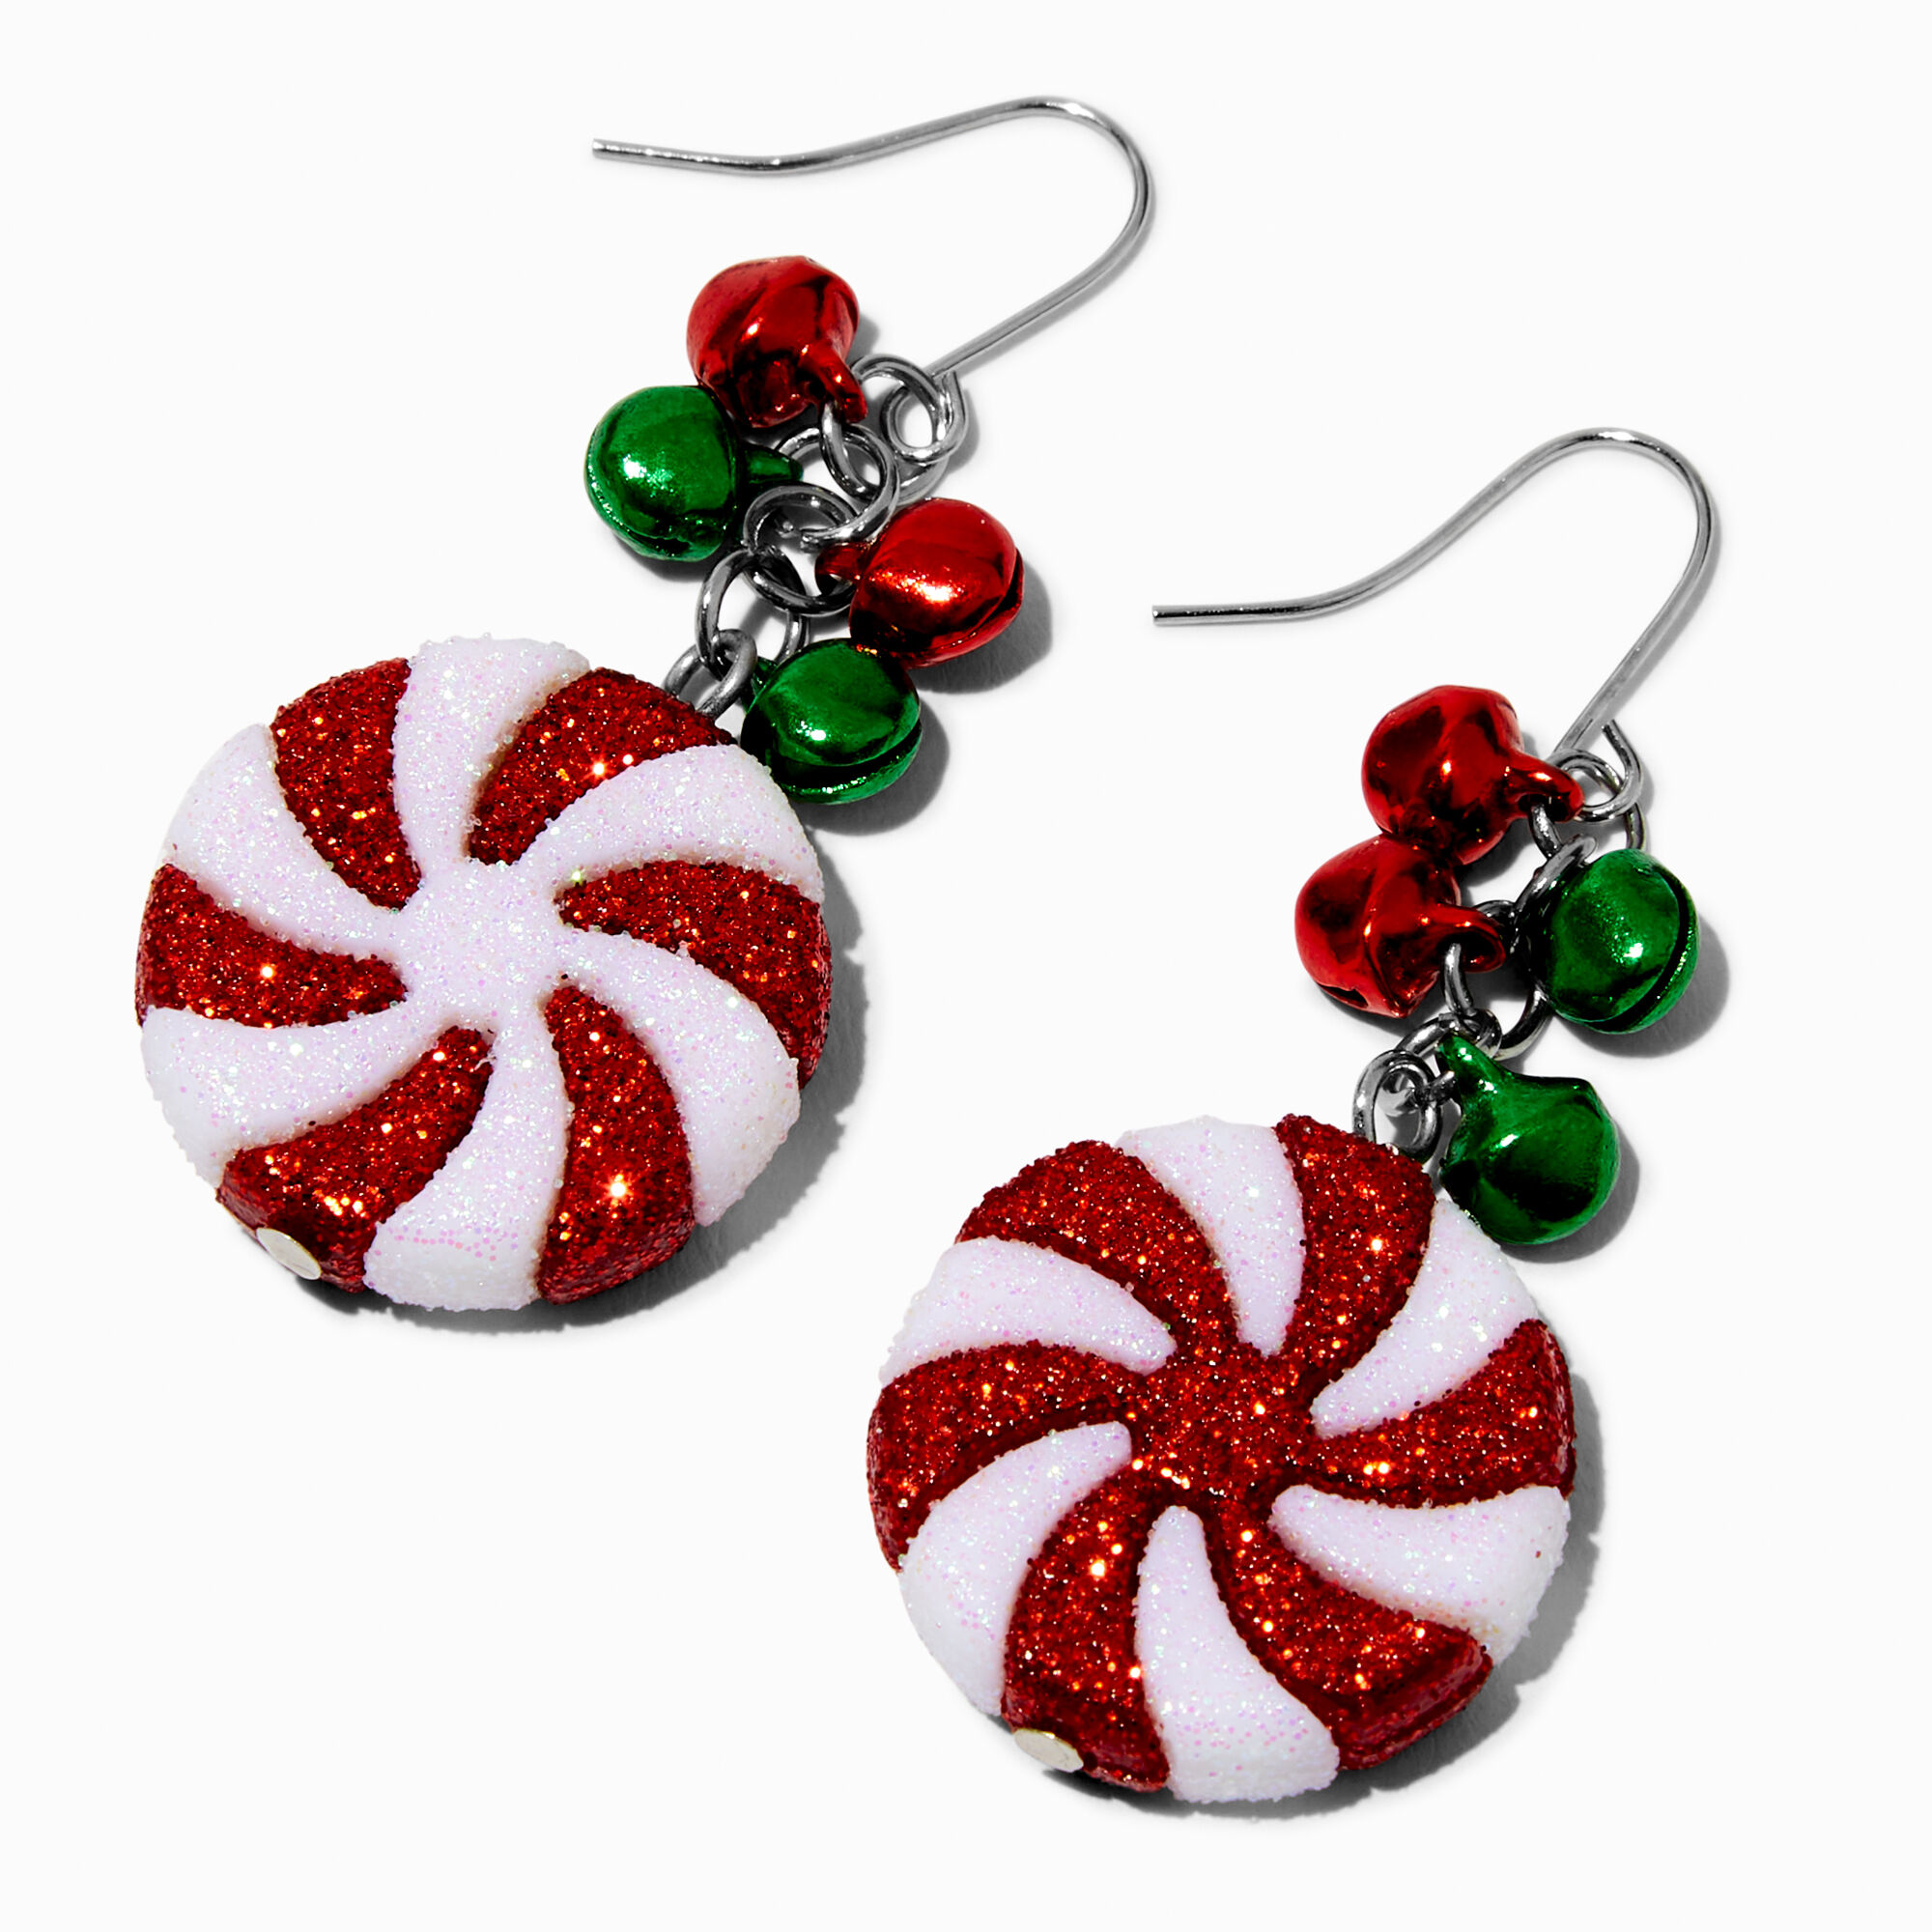 View Claires Peppermint Swirl Jingle Bells 15 Drop Earrings Red information